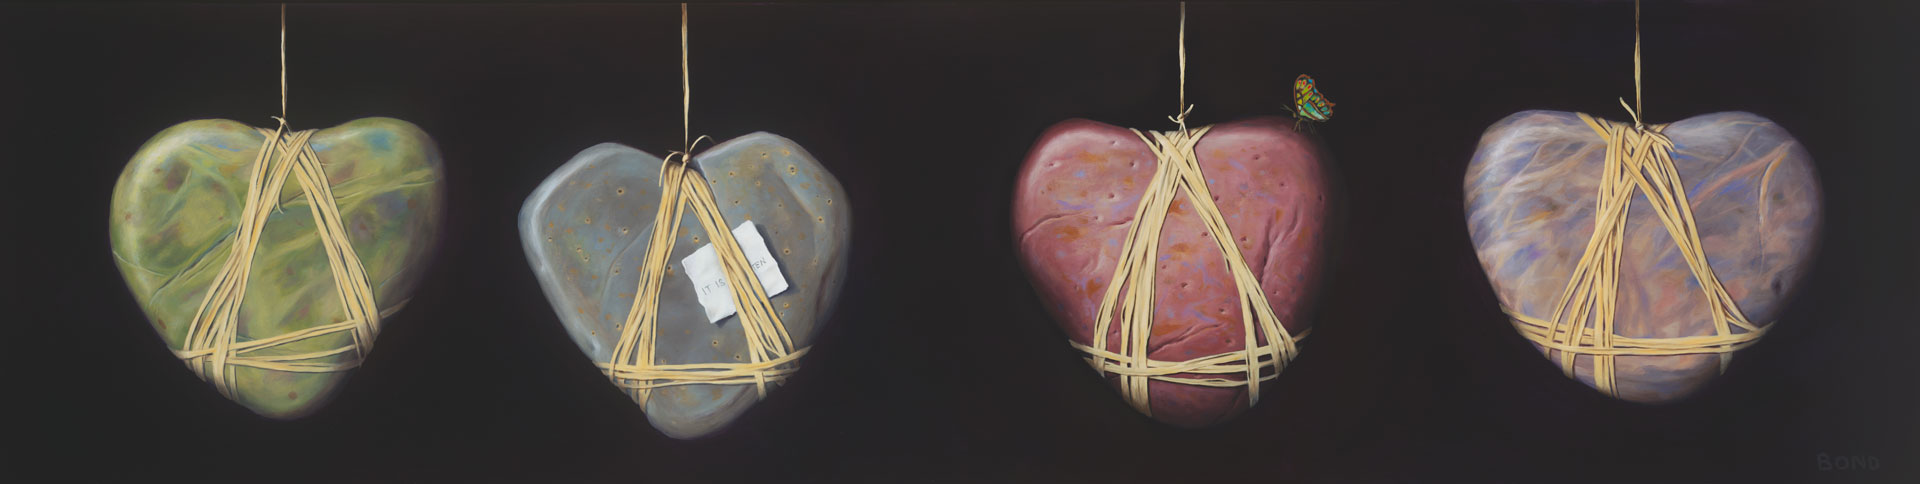 A Discourse on Love, painting of heart stone suspended in air by twine with butterfly and a love note, art elements are heart shaped rock, heart stone, suspended, butterfly,  painting, soulful uplifting inspirational art, soul stirring illusion art, romantic art,  surrealism, surreal art, dreamlike imagery, fanciful art, fantasy art, dreamscape visual, metaphysical art, spiritual painting, metaphysical painting, spiritual art, whimsical art, whimsy art, dream art, fantastic realism art, limited edition giclee, signed art print, fine art reproduction, original magic realism oil painting by Paul Bond